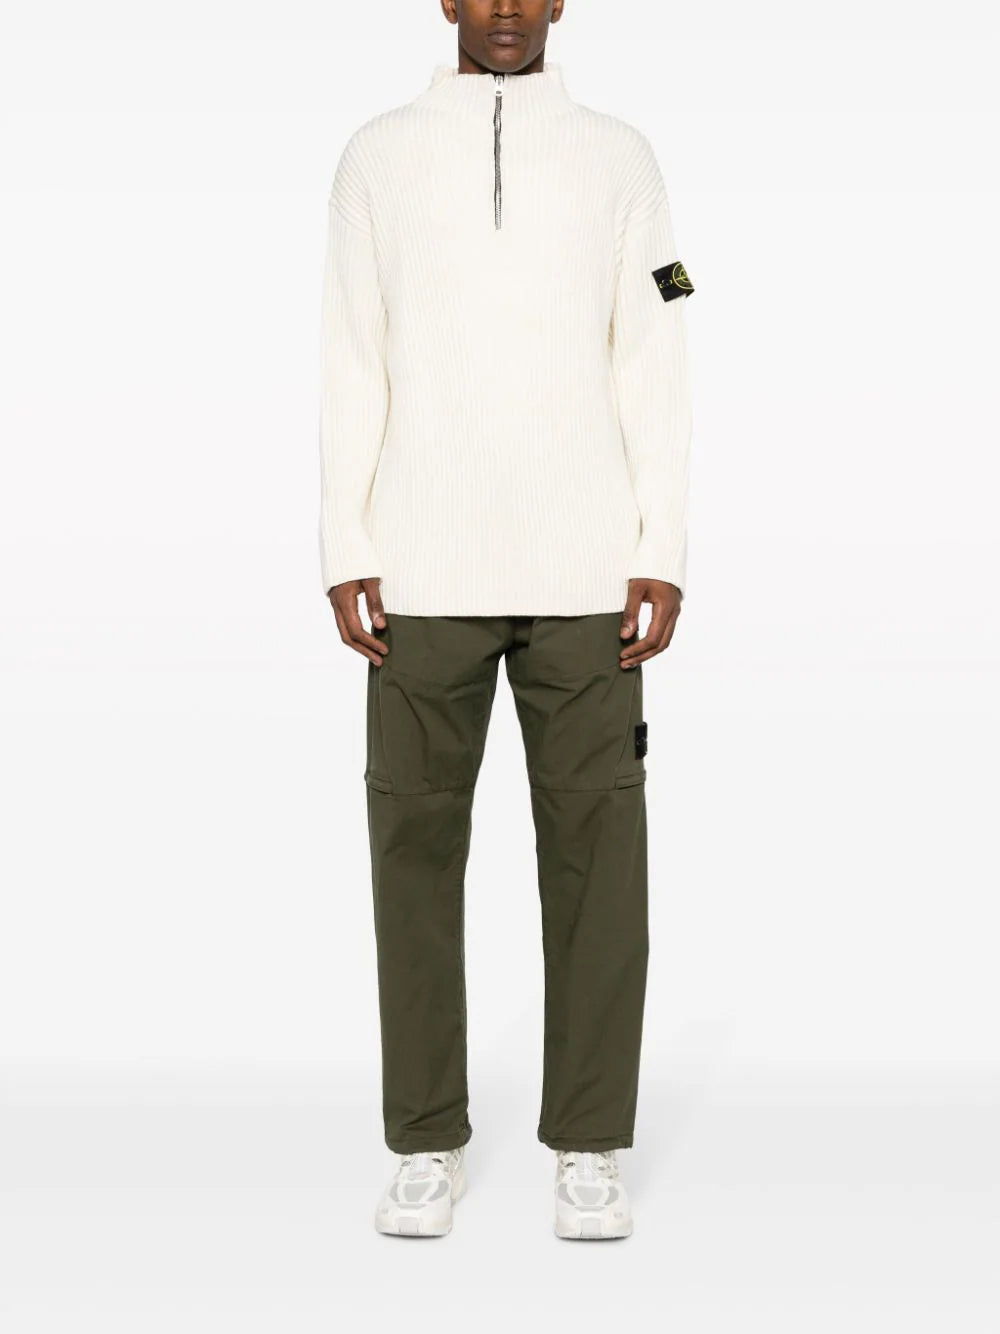 Stone Island Compass Badge Straight Leg Trousers | Shop in Lisbon & Online at SHEET-1.com